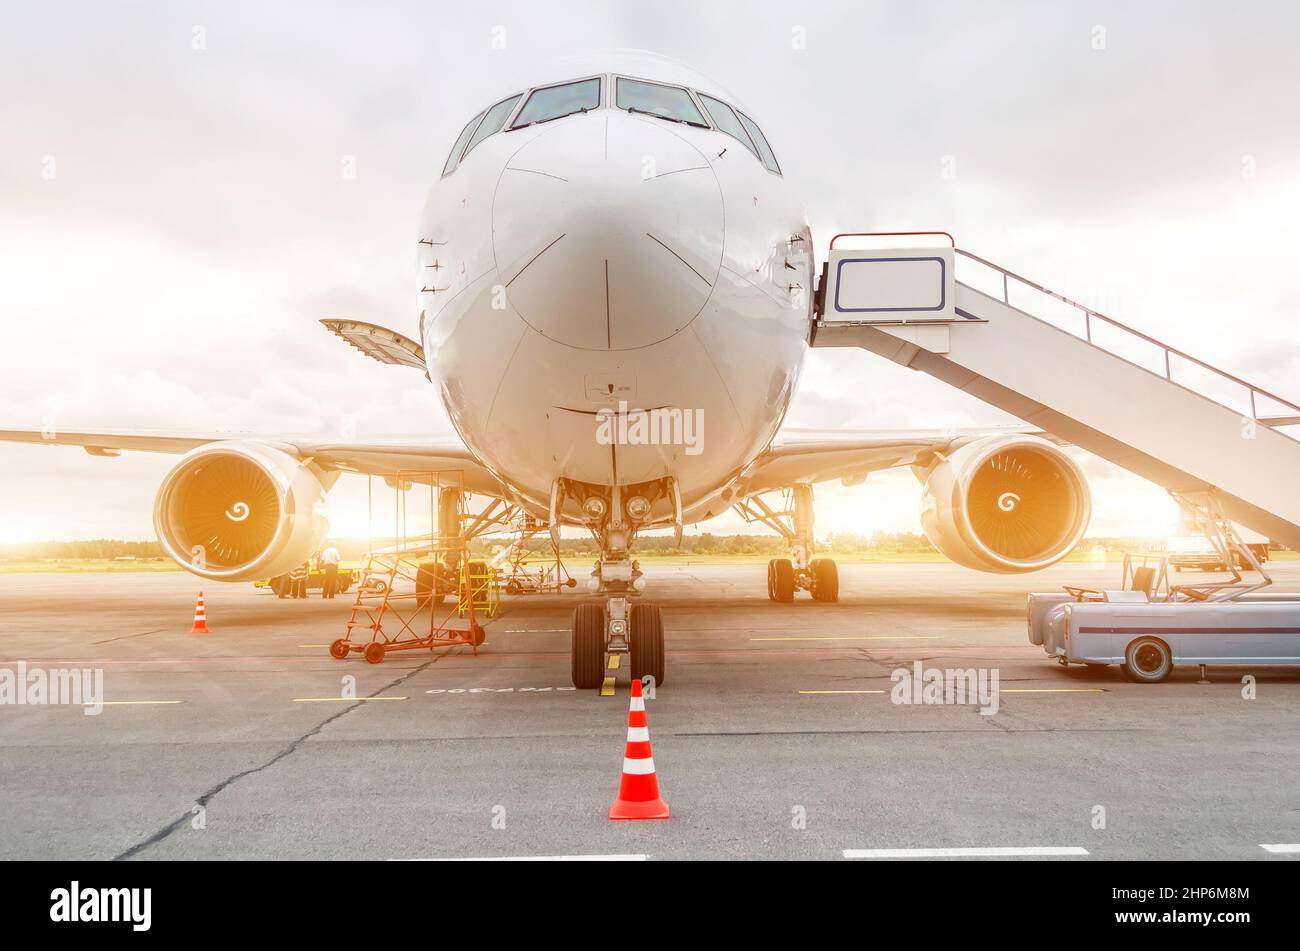 Passenger aircraft parked at the airport with ladder ladder Stock Photo